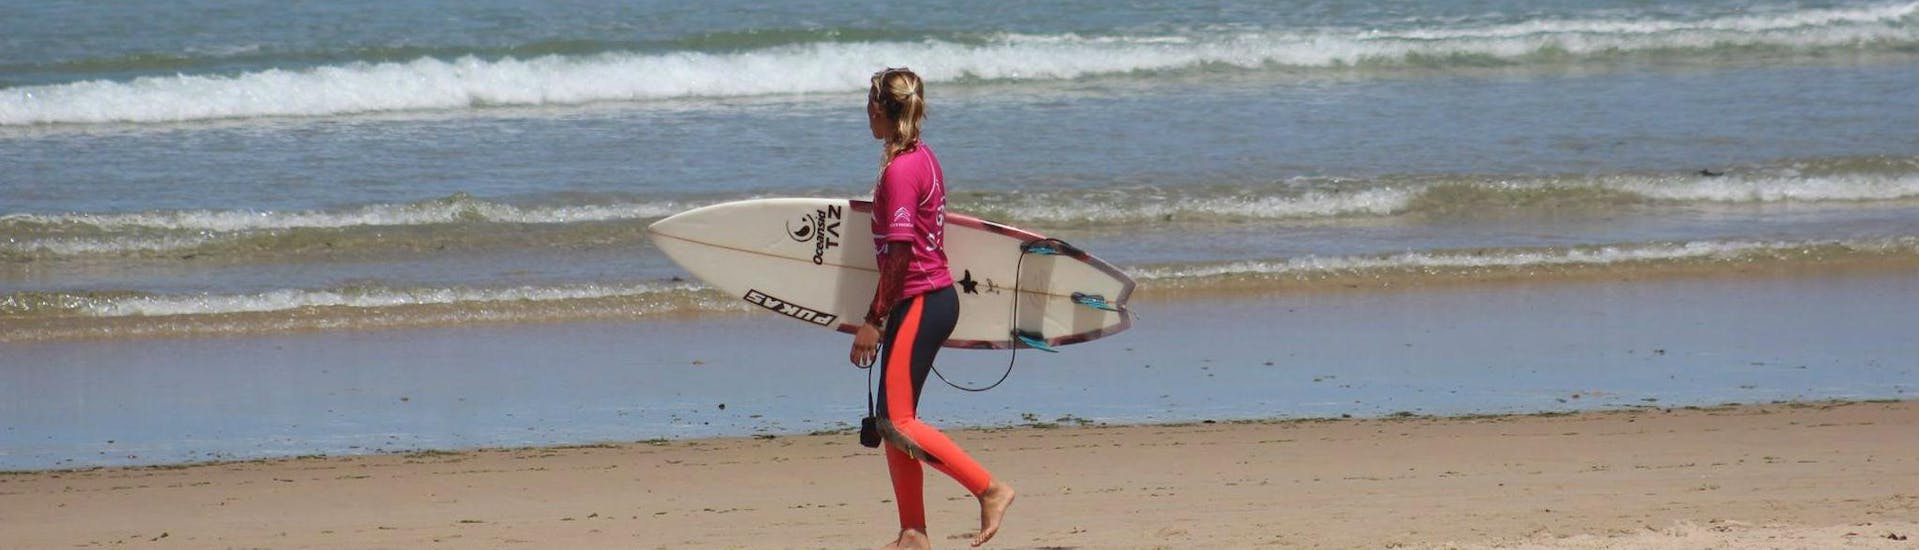 Surfing Lessons for Kids & Adults - Advanced.